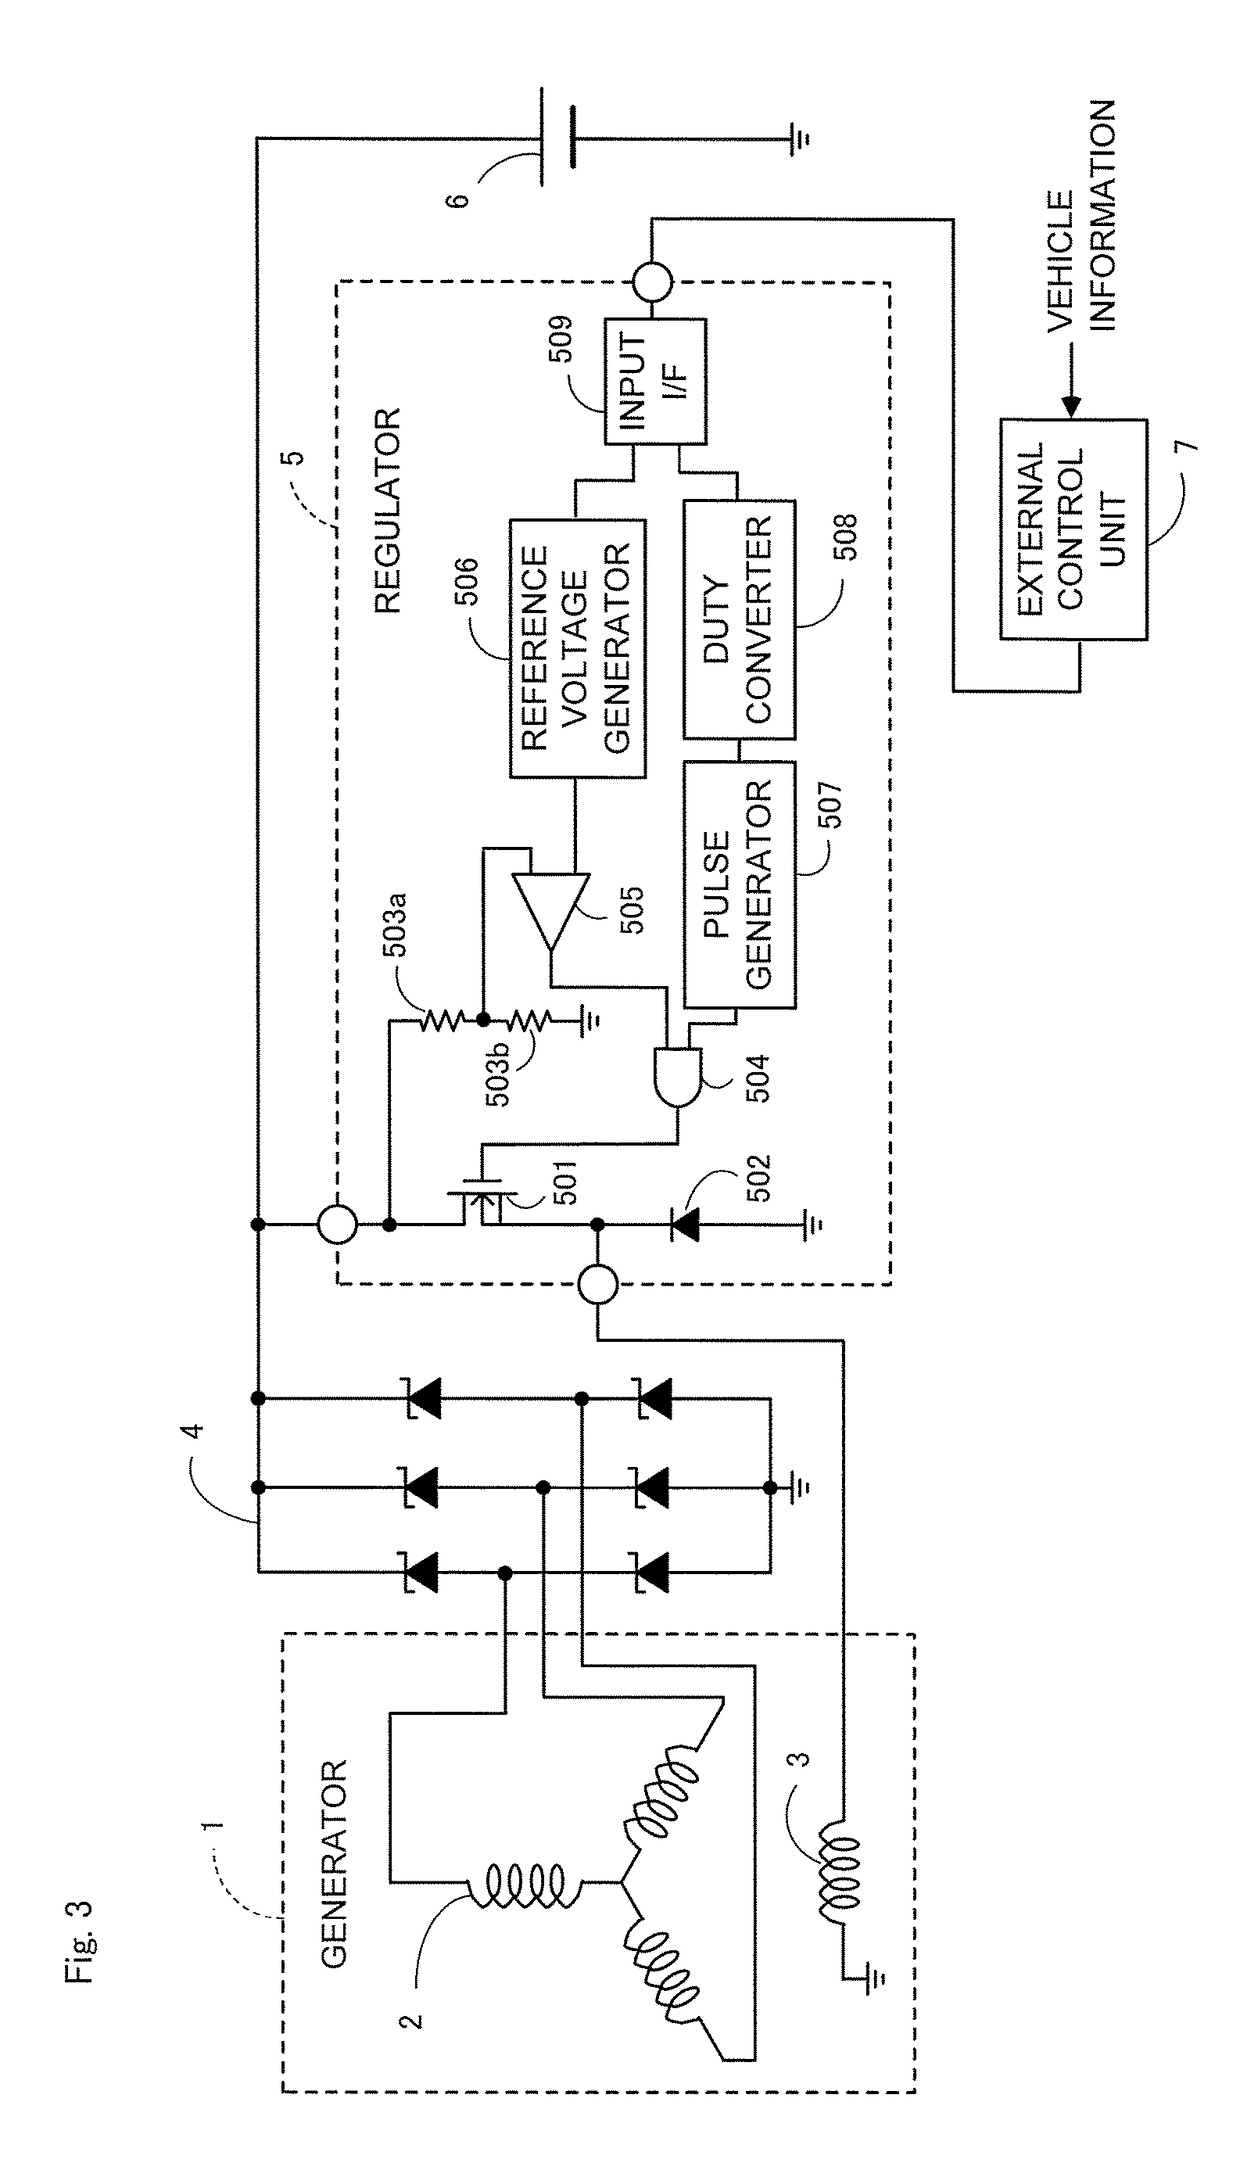 Control apparatus of an AC generator for a vehicle